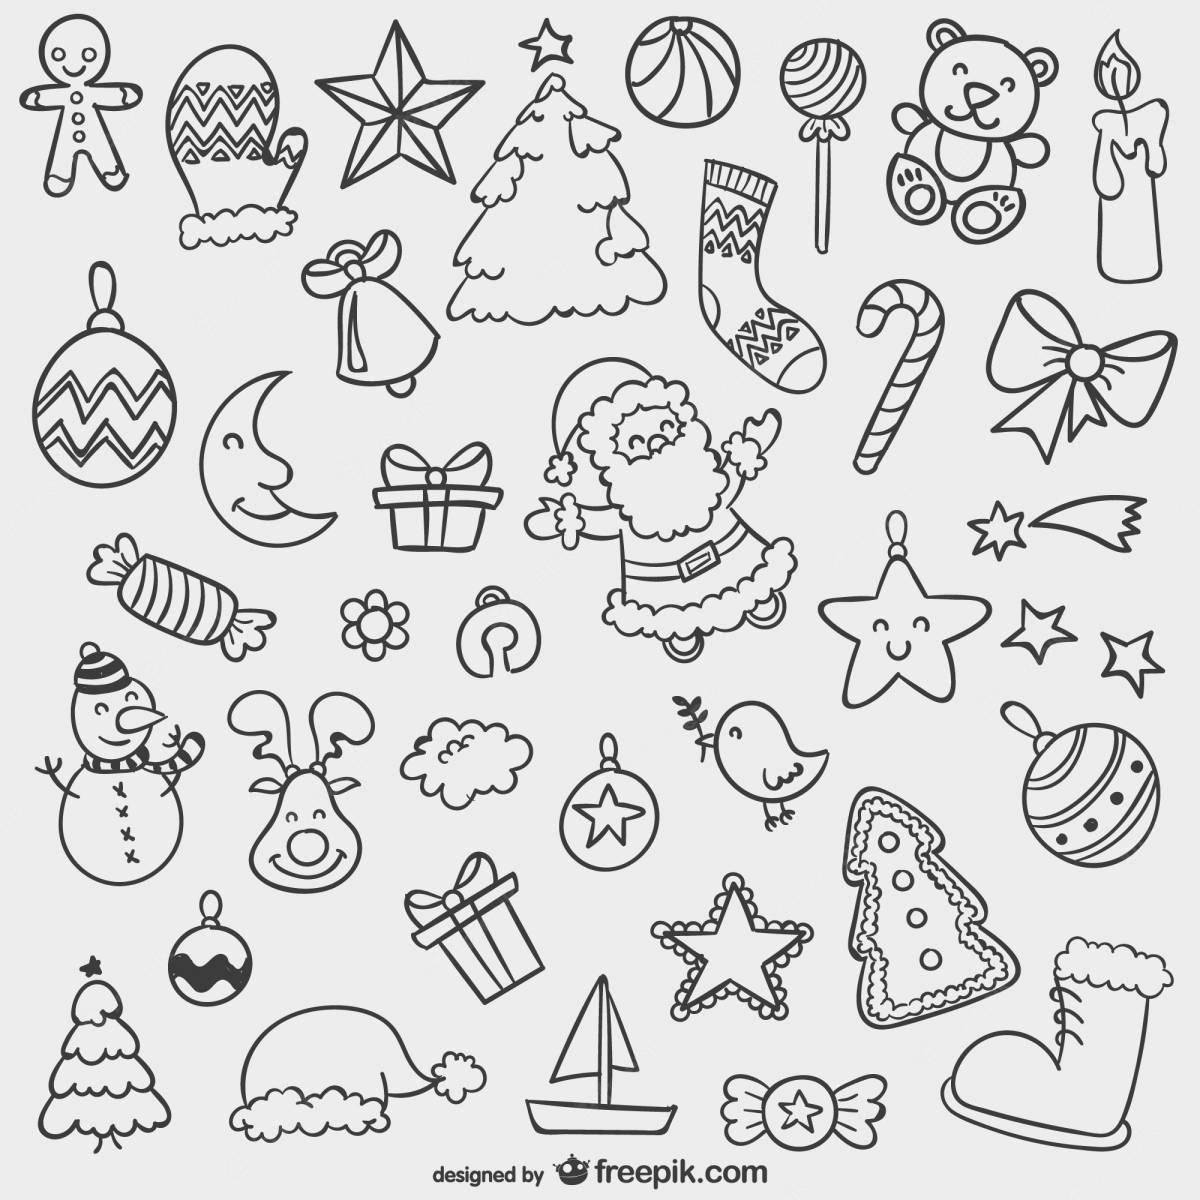 Great stickers for coloring pages